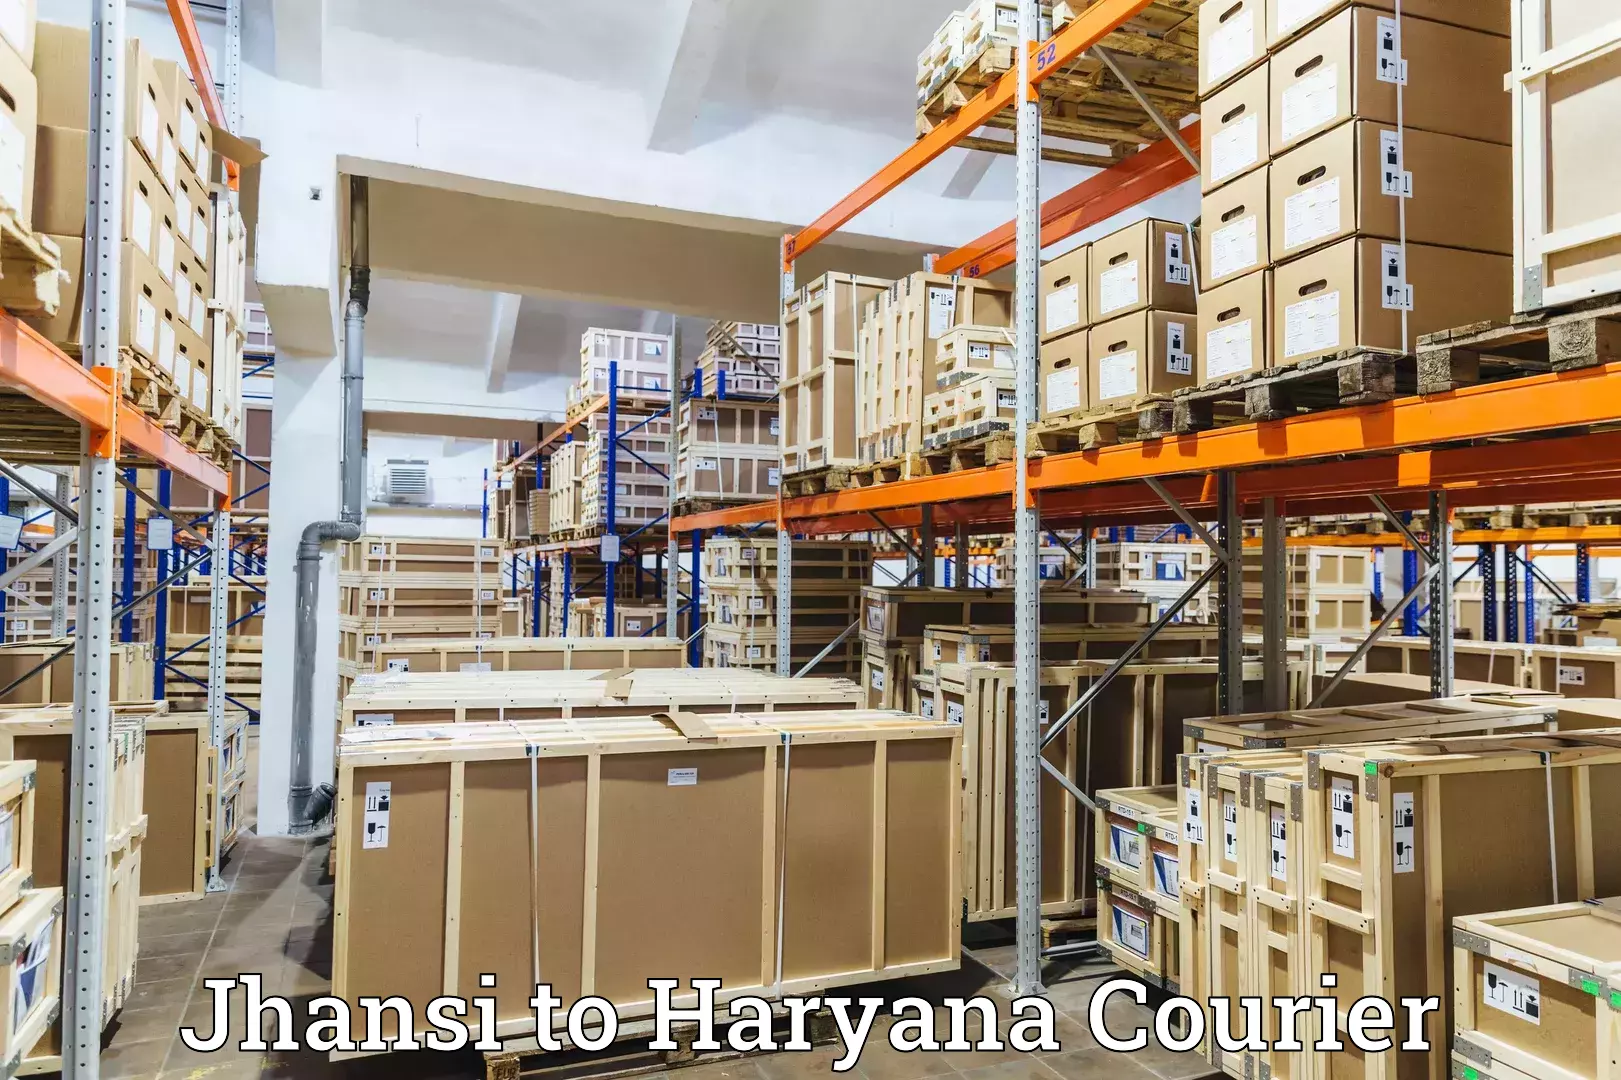 Bulk courier orders Jhansi to Fatehabad